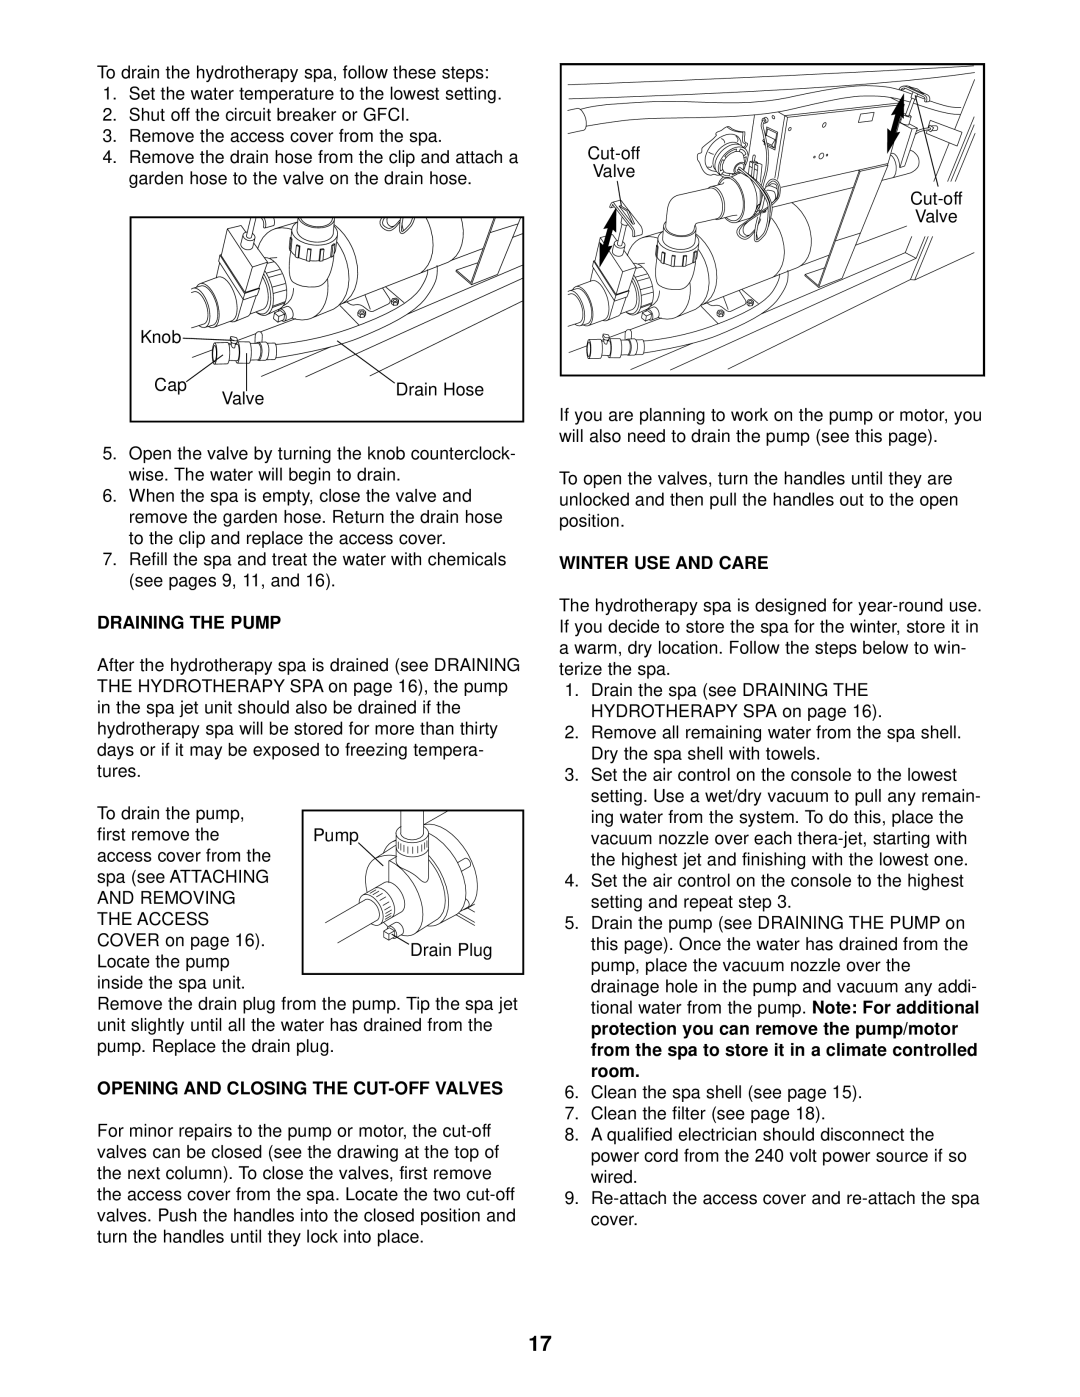 Inter-Tel 831.10507 user manual Draining The Pump, Opening And Closing The Cut-Off Valves, Winter Use And Care 